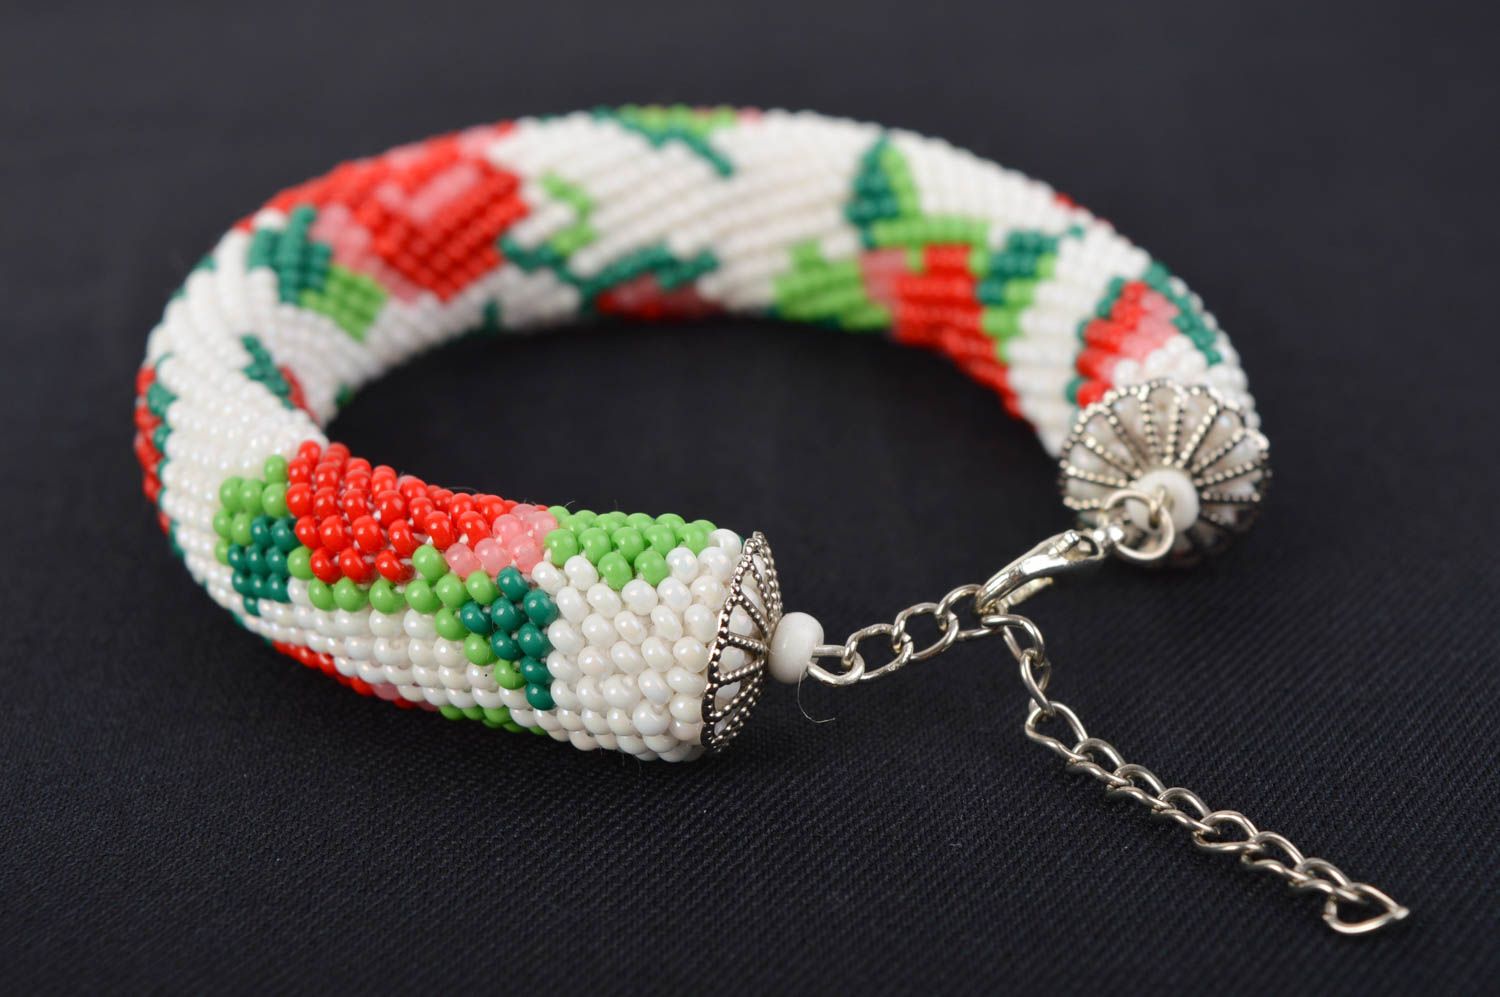 Handmade beaded cord bracelet roses in red, green, and white colors for women and girls photo 1